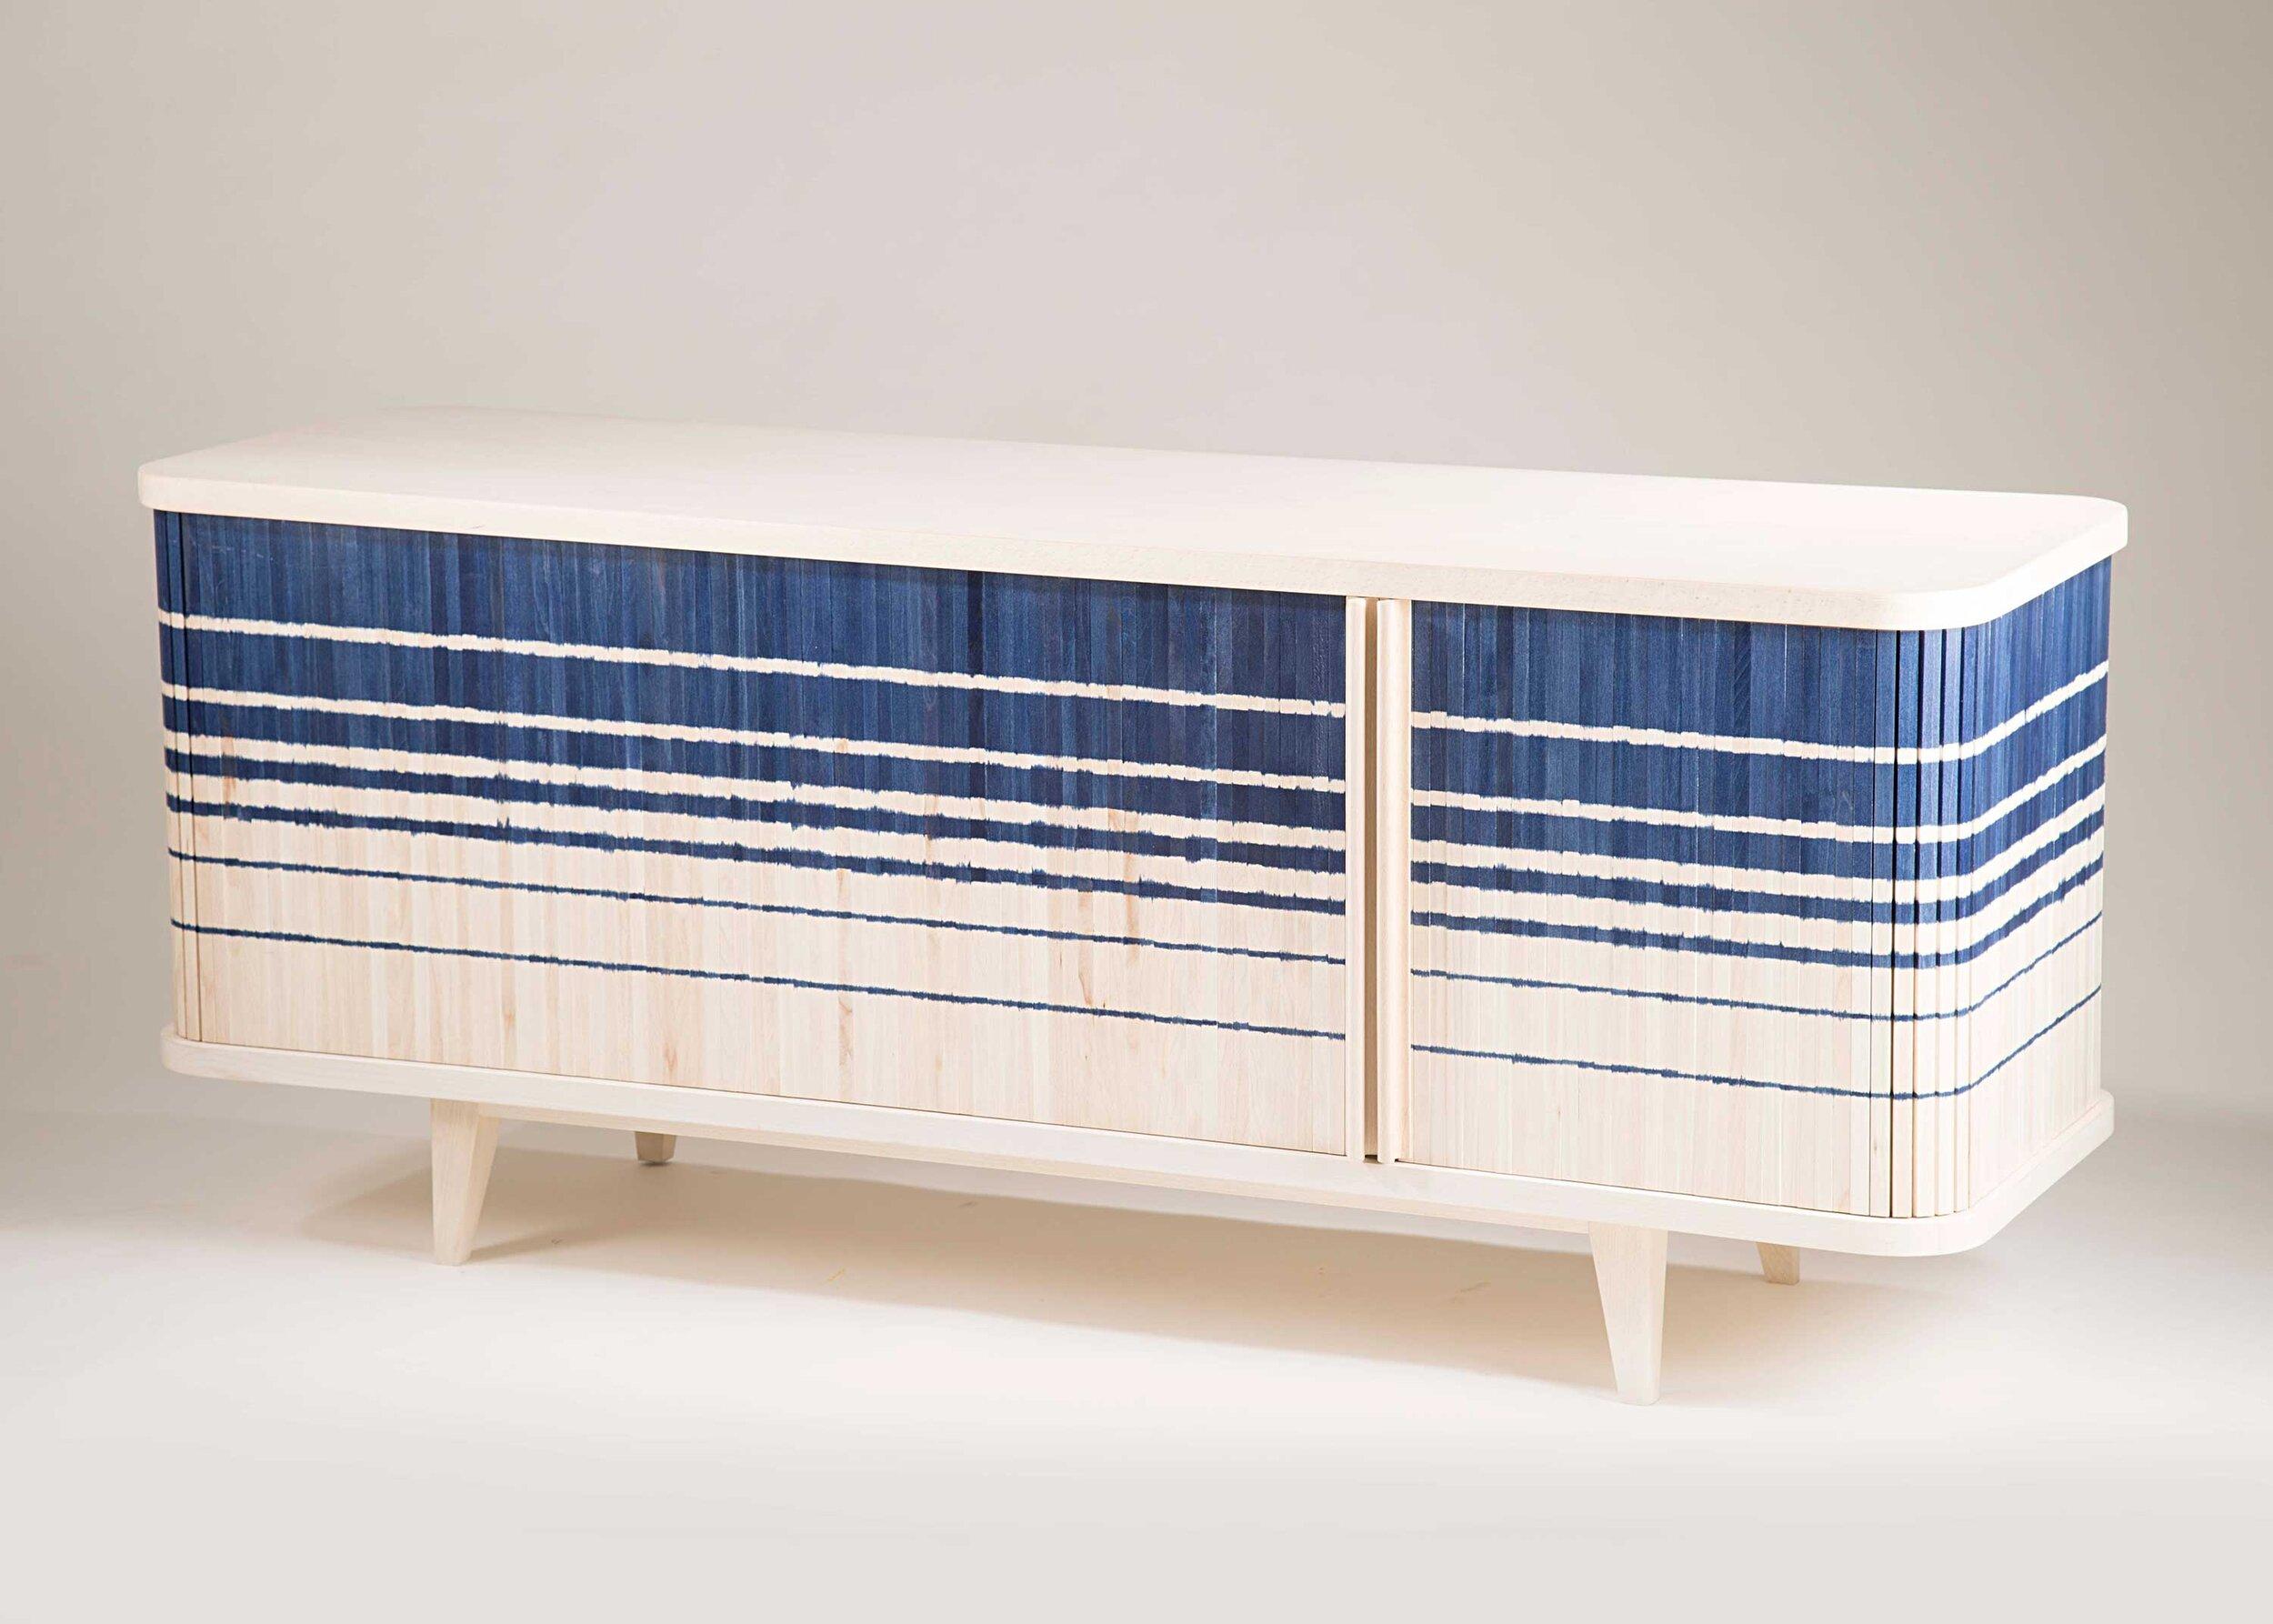 Ikat credenza by Indo Made
One of a kind
Dimensions: D 152.4, W 45.7, H 61 cm 
Materials: Maple.

Different dimensions available.  
Each piece is carefully handcrafted by our team using natural materials and traditional processes. Slight